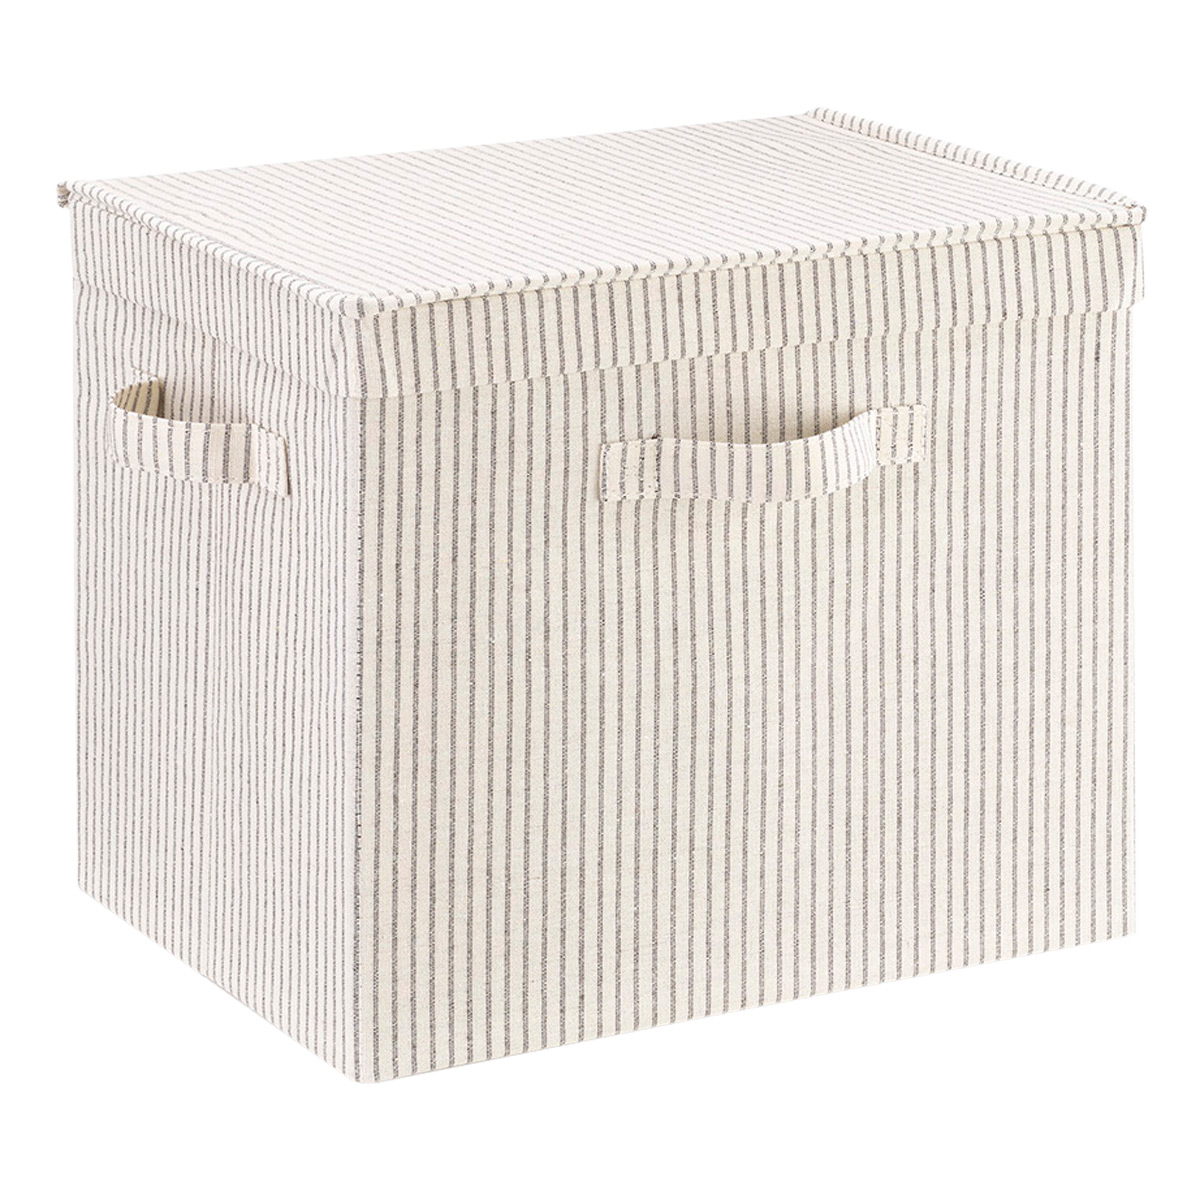 The Container Store Storage Cube Grey Stripe